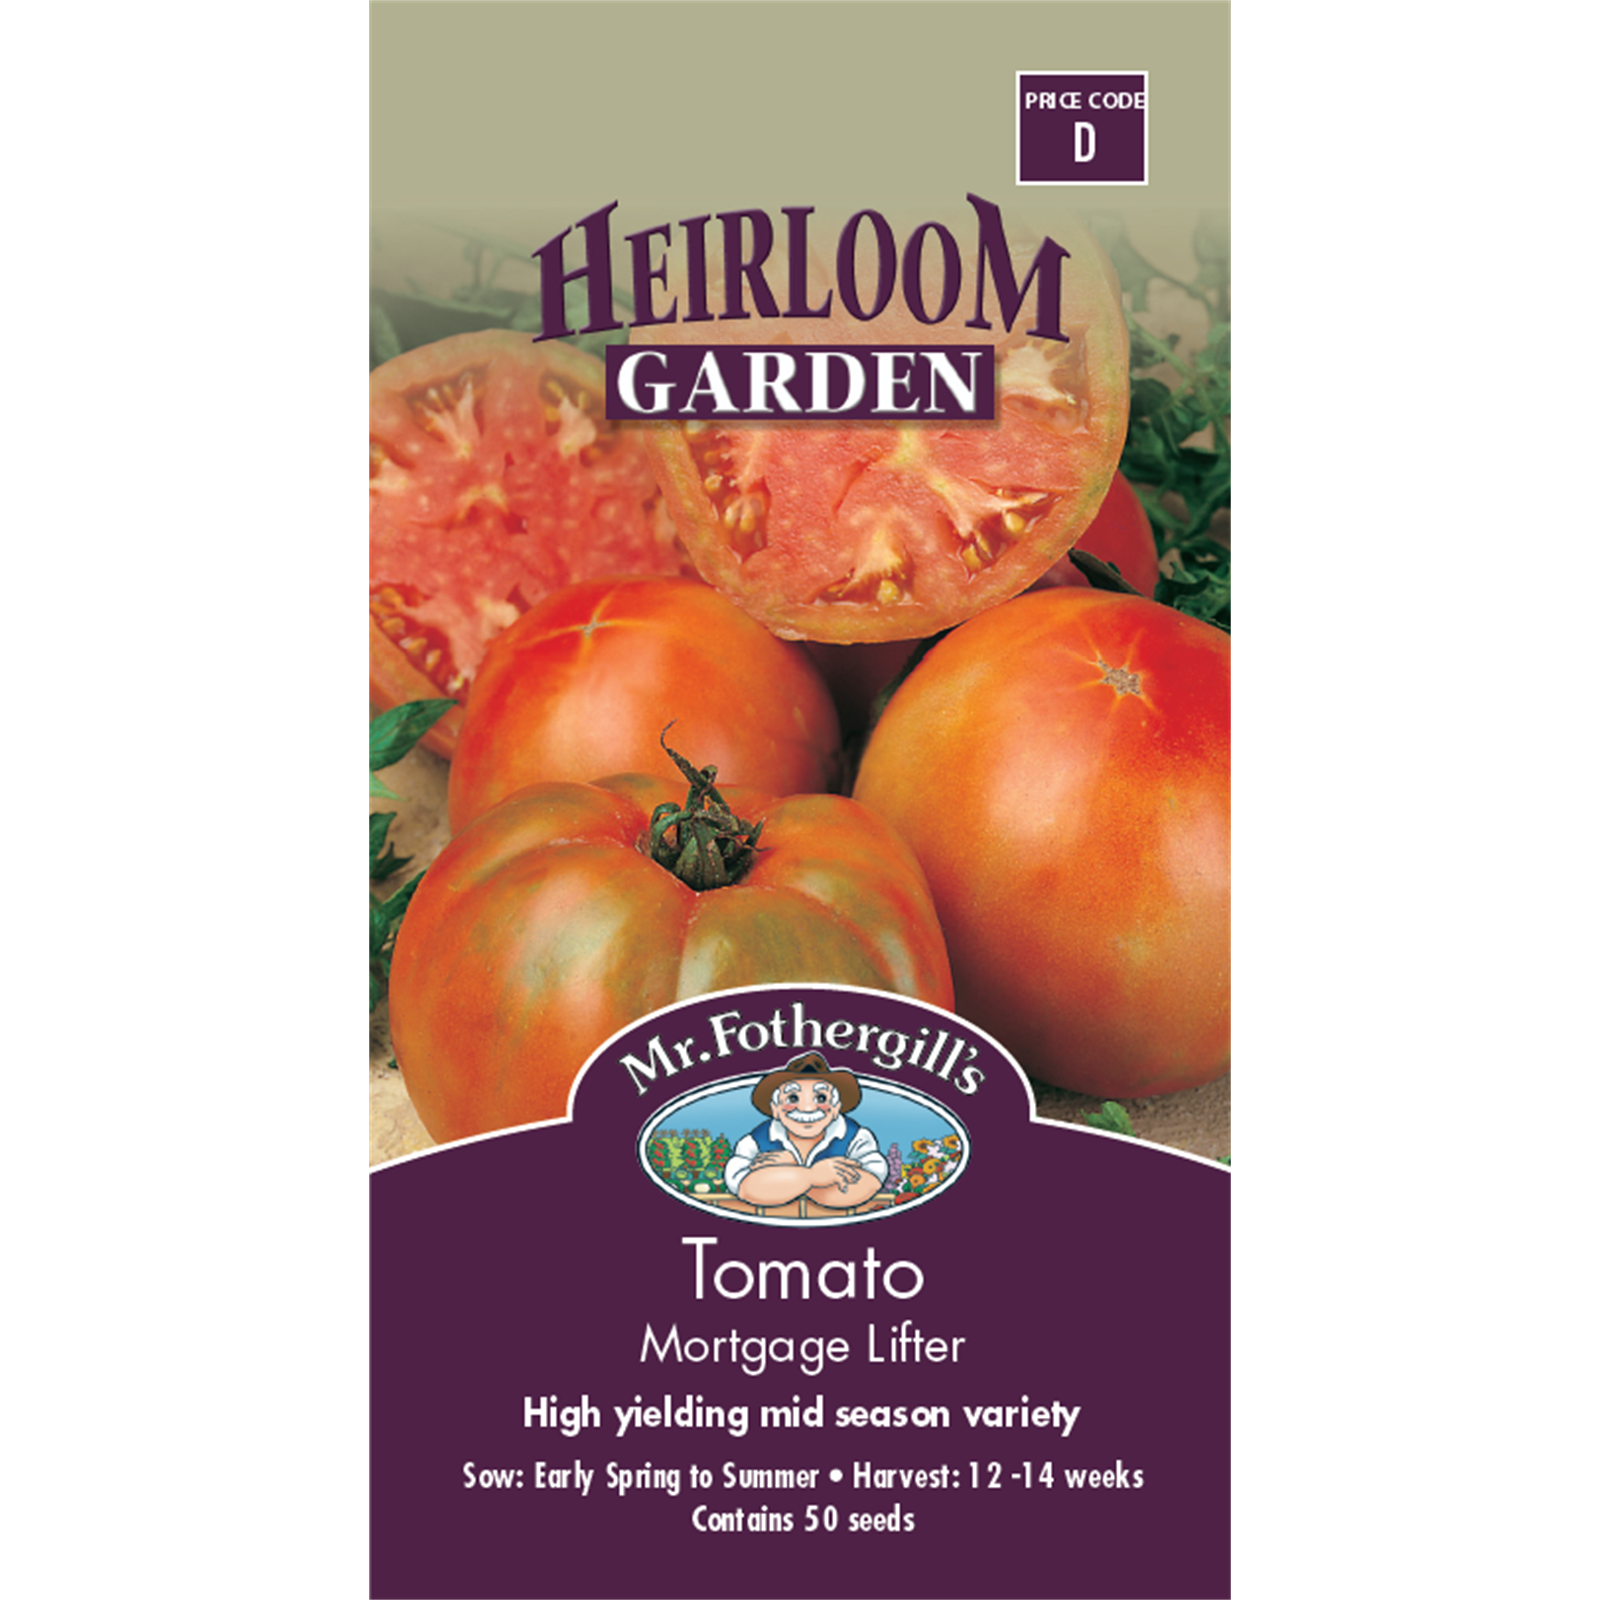 Mr Fothergill's Mortgage Lifter Tomato Heirloom Seeds